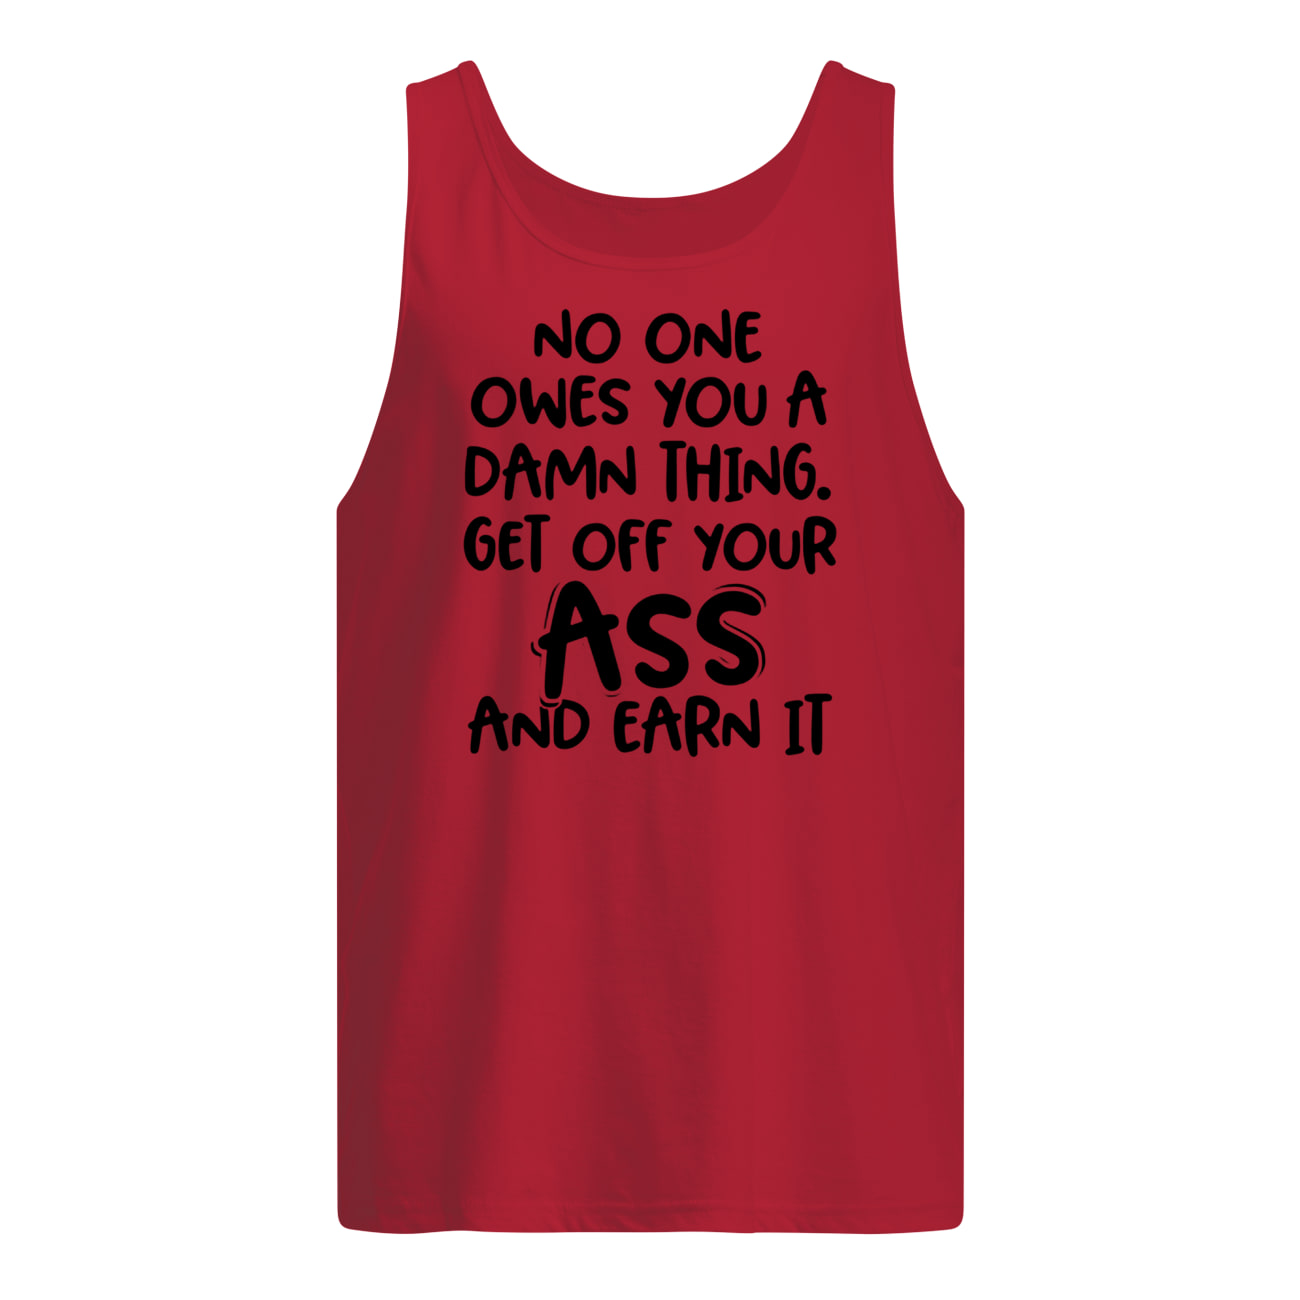 No one owes you a damn thing get off your ass and earn it tank top